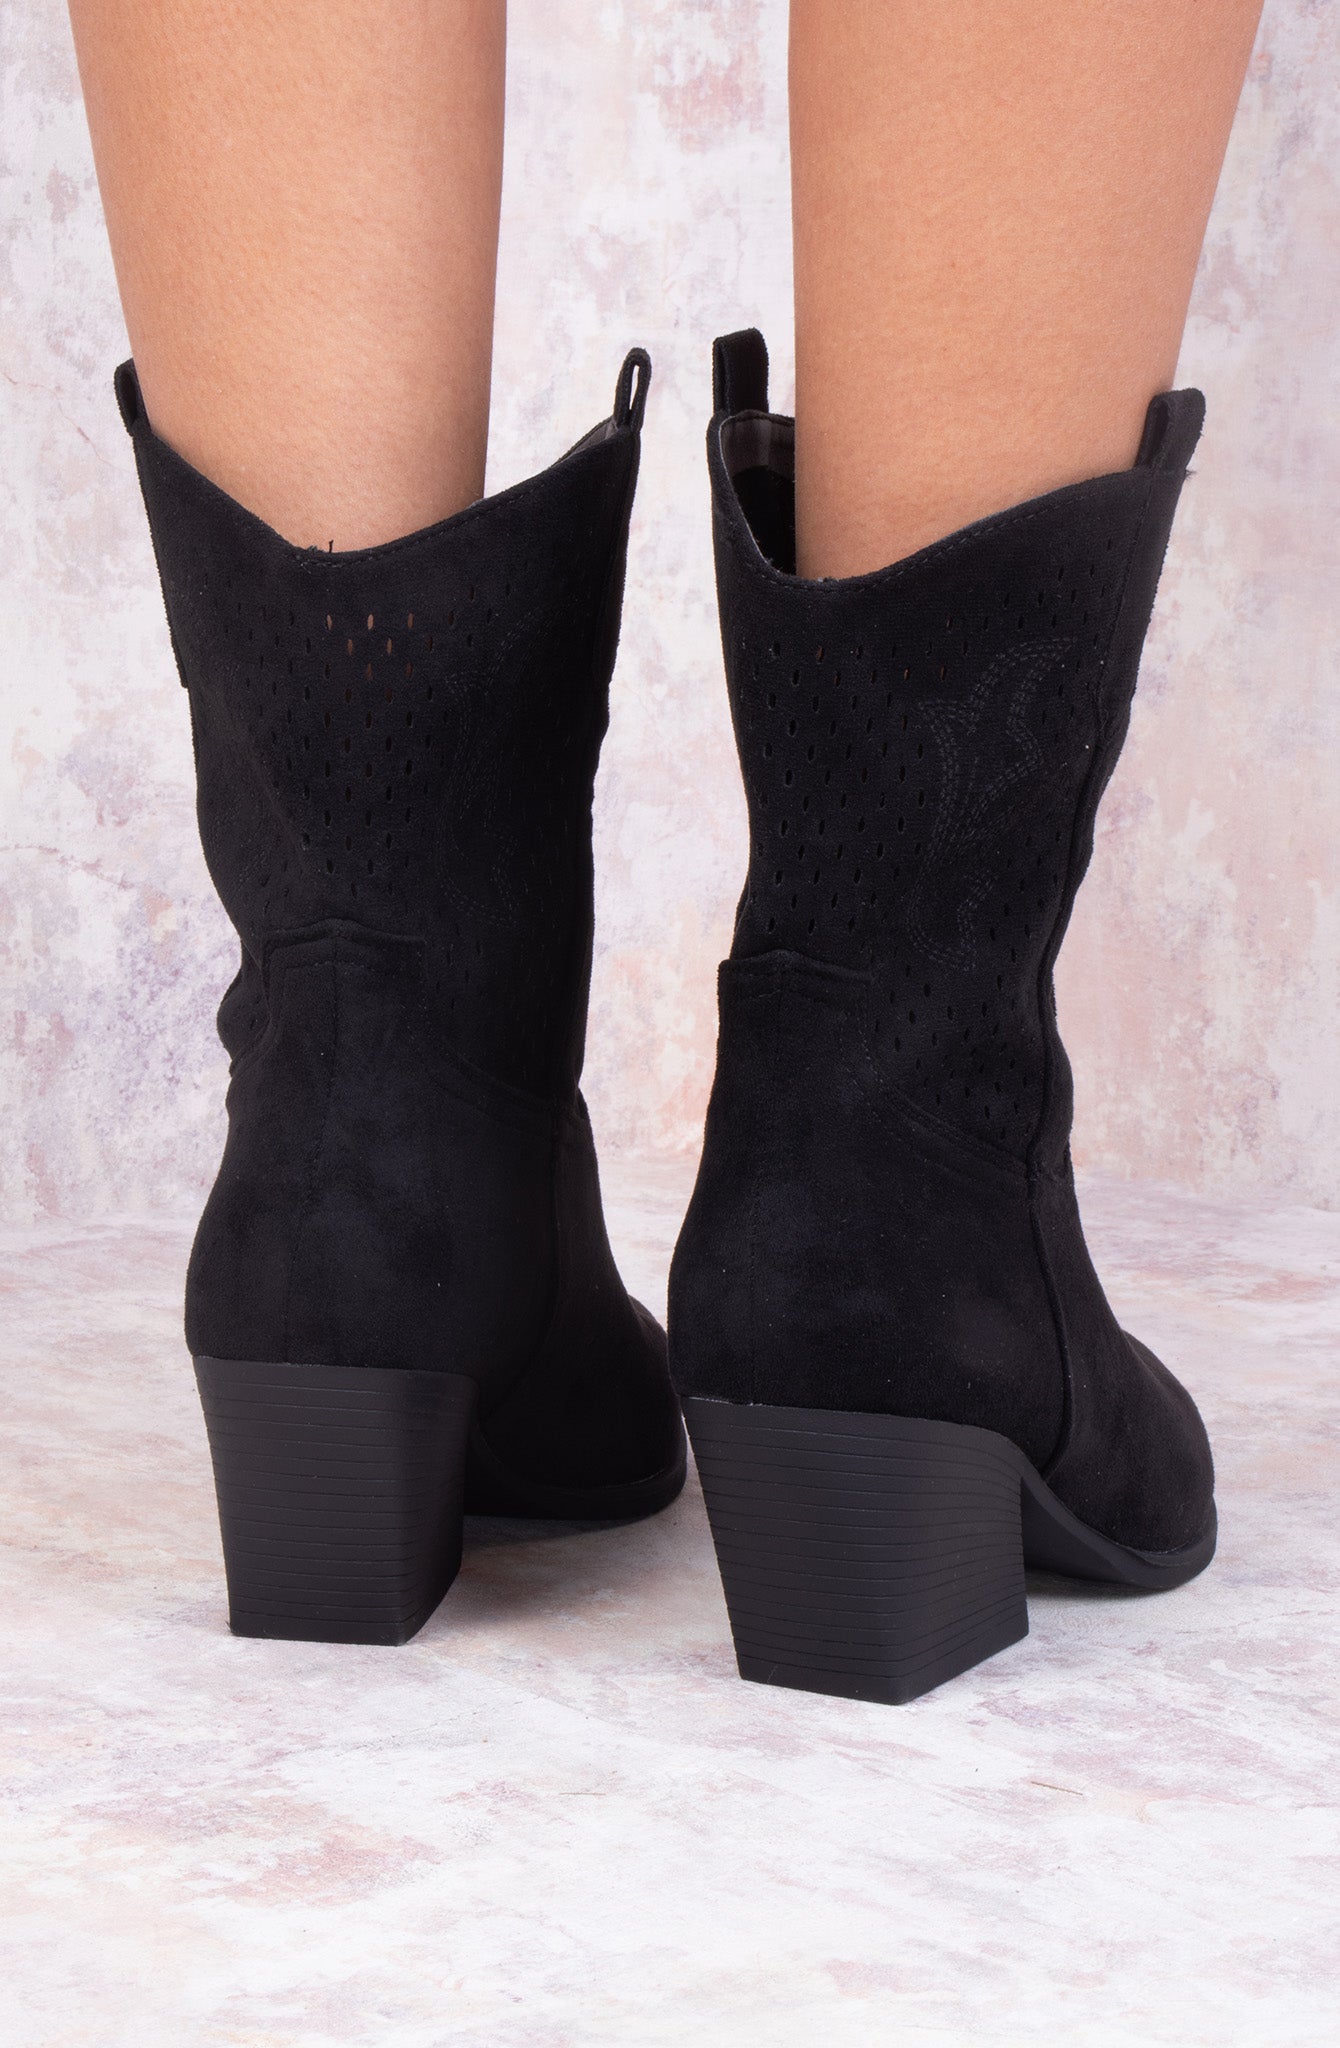 Black Almond Toe Ankle Embroidered Cowboy Boot